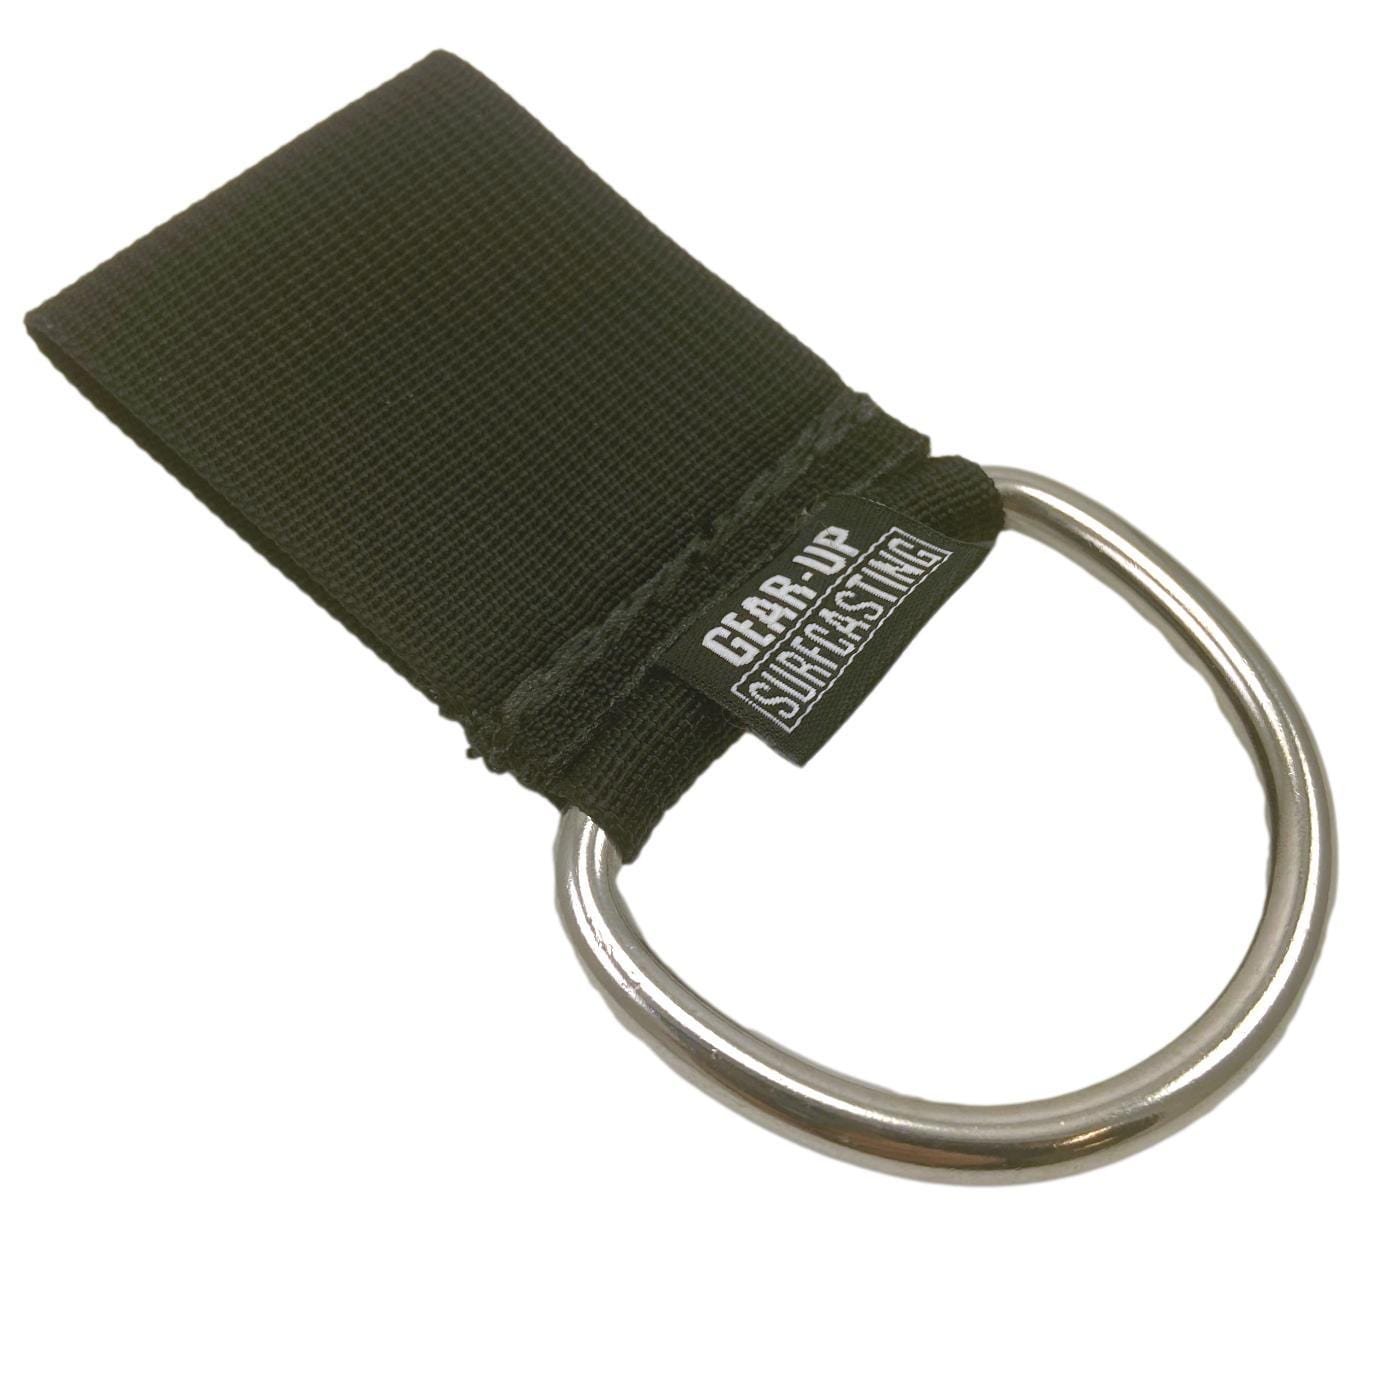 Gear-Up Stainless Steel "D" Ring for Surf Belt